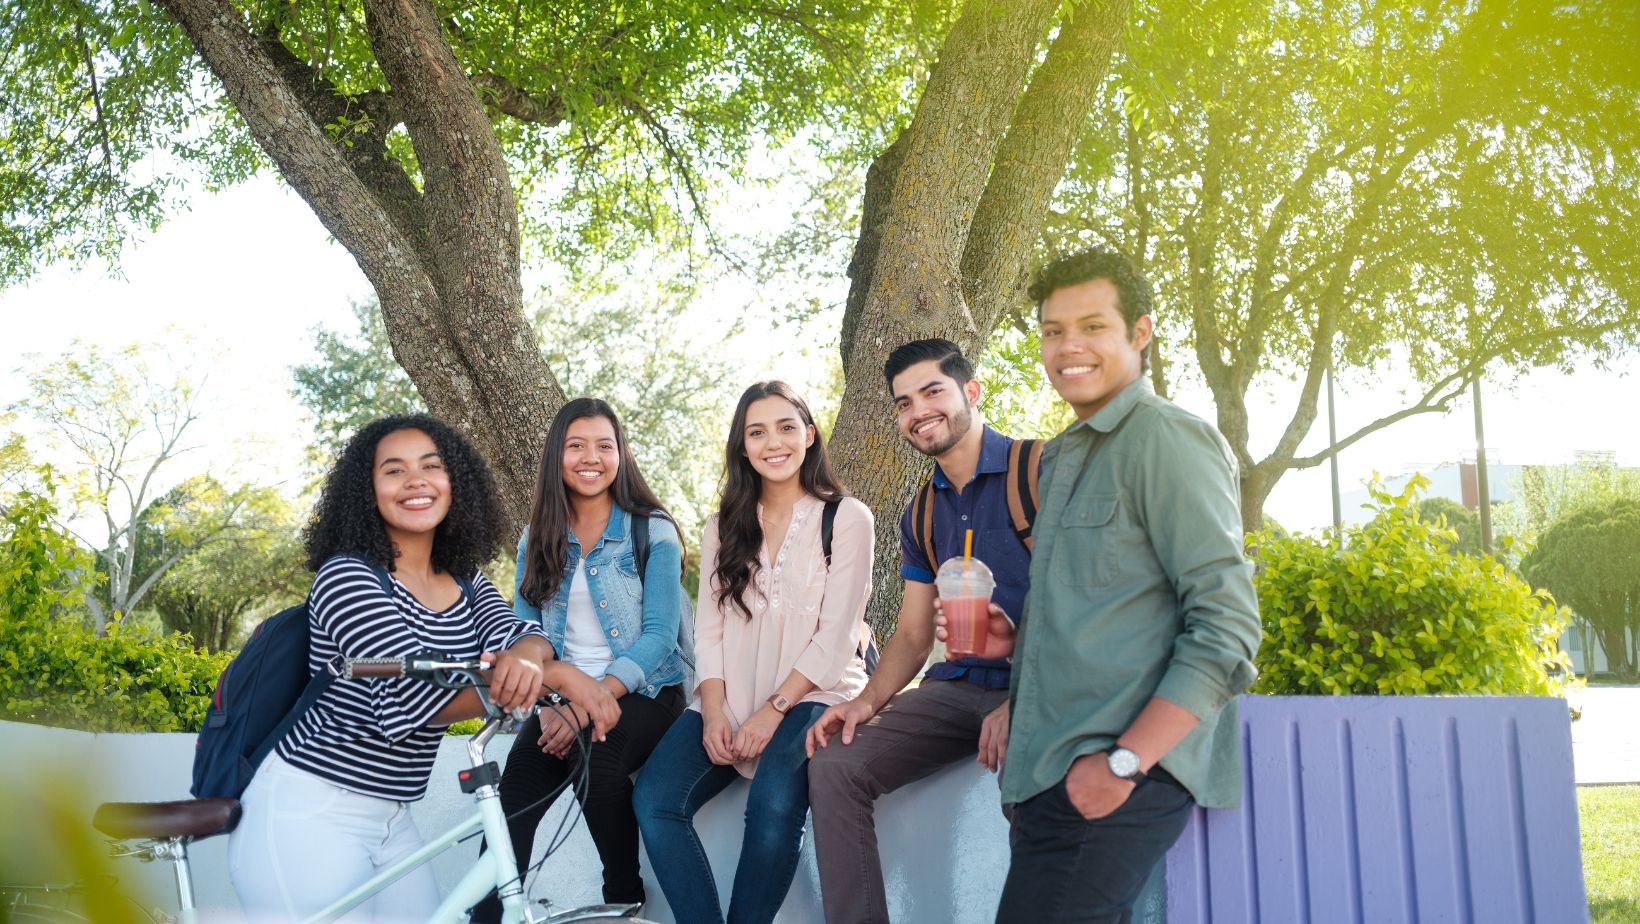 group of 5 diverse millennials outside in a park smiling at the camera